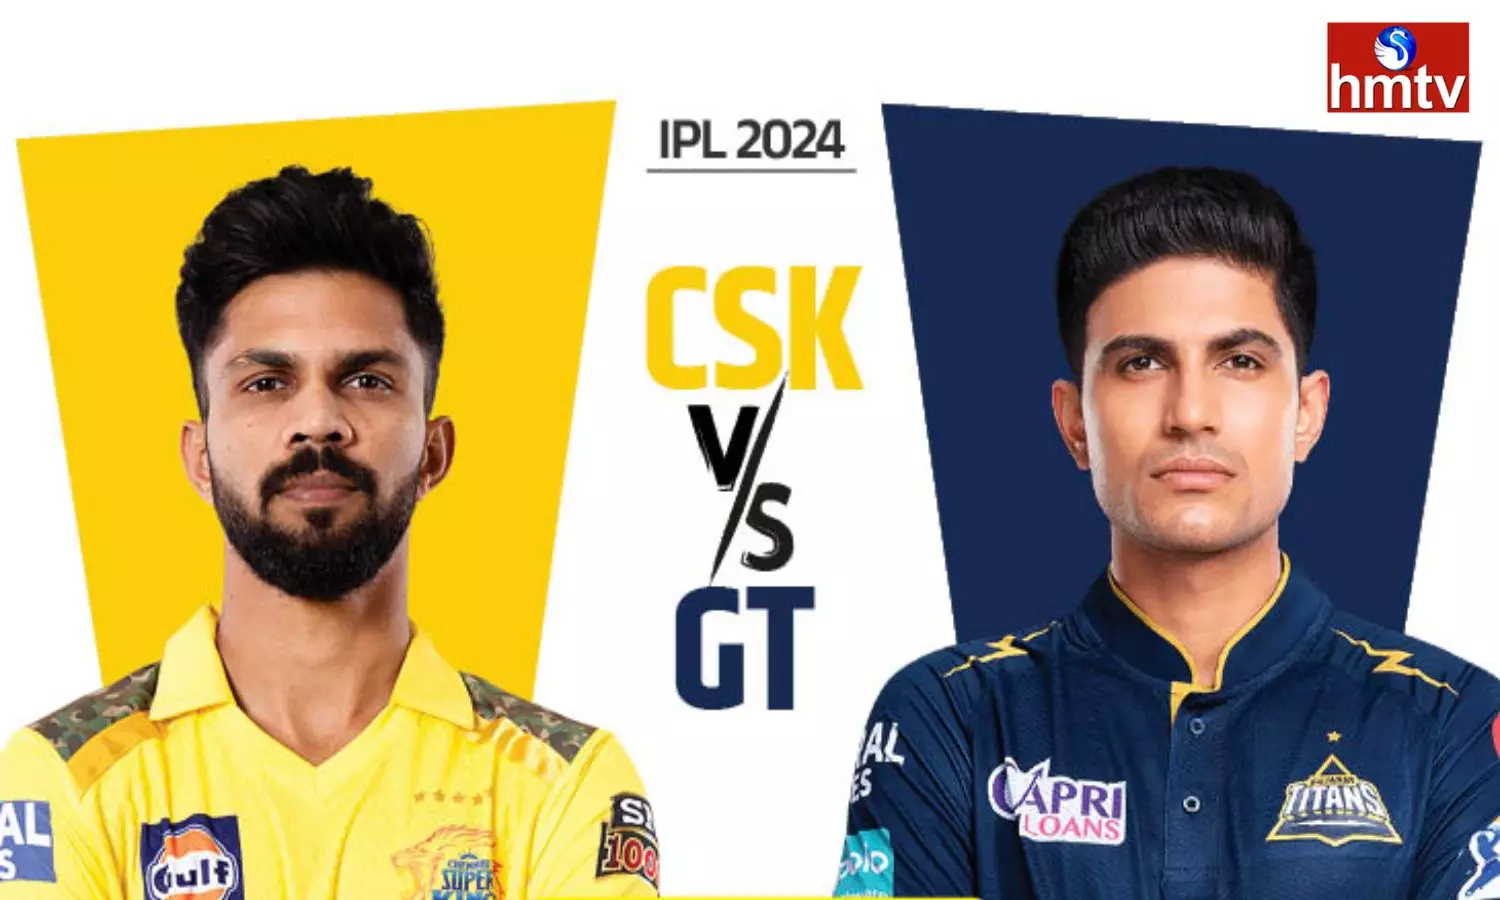 ipl 2024 chennai super kings vs gujarat titans 7th match preview and predicted playing xi live streaming csk vs gt 26th march